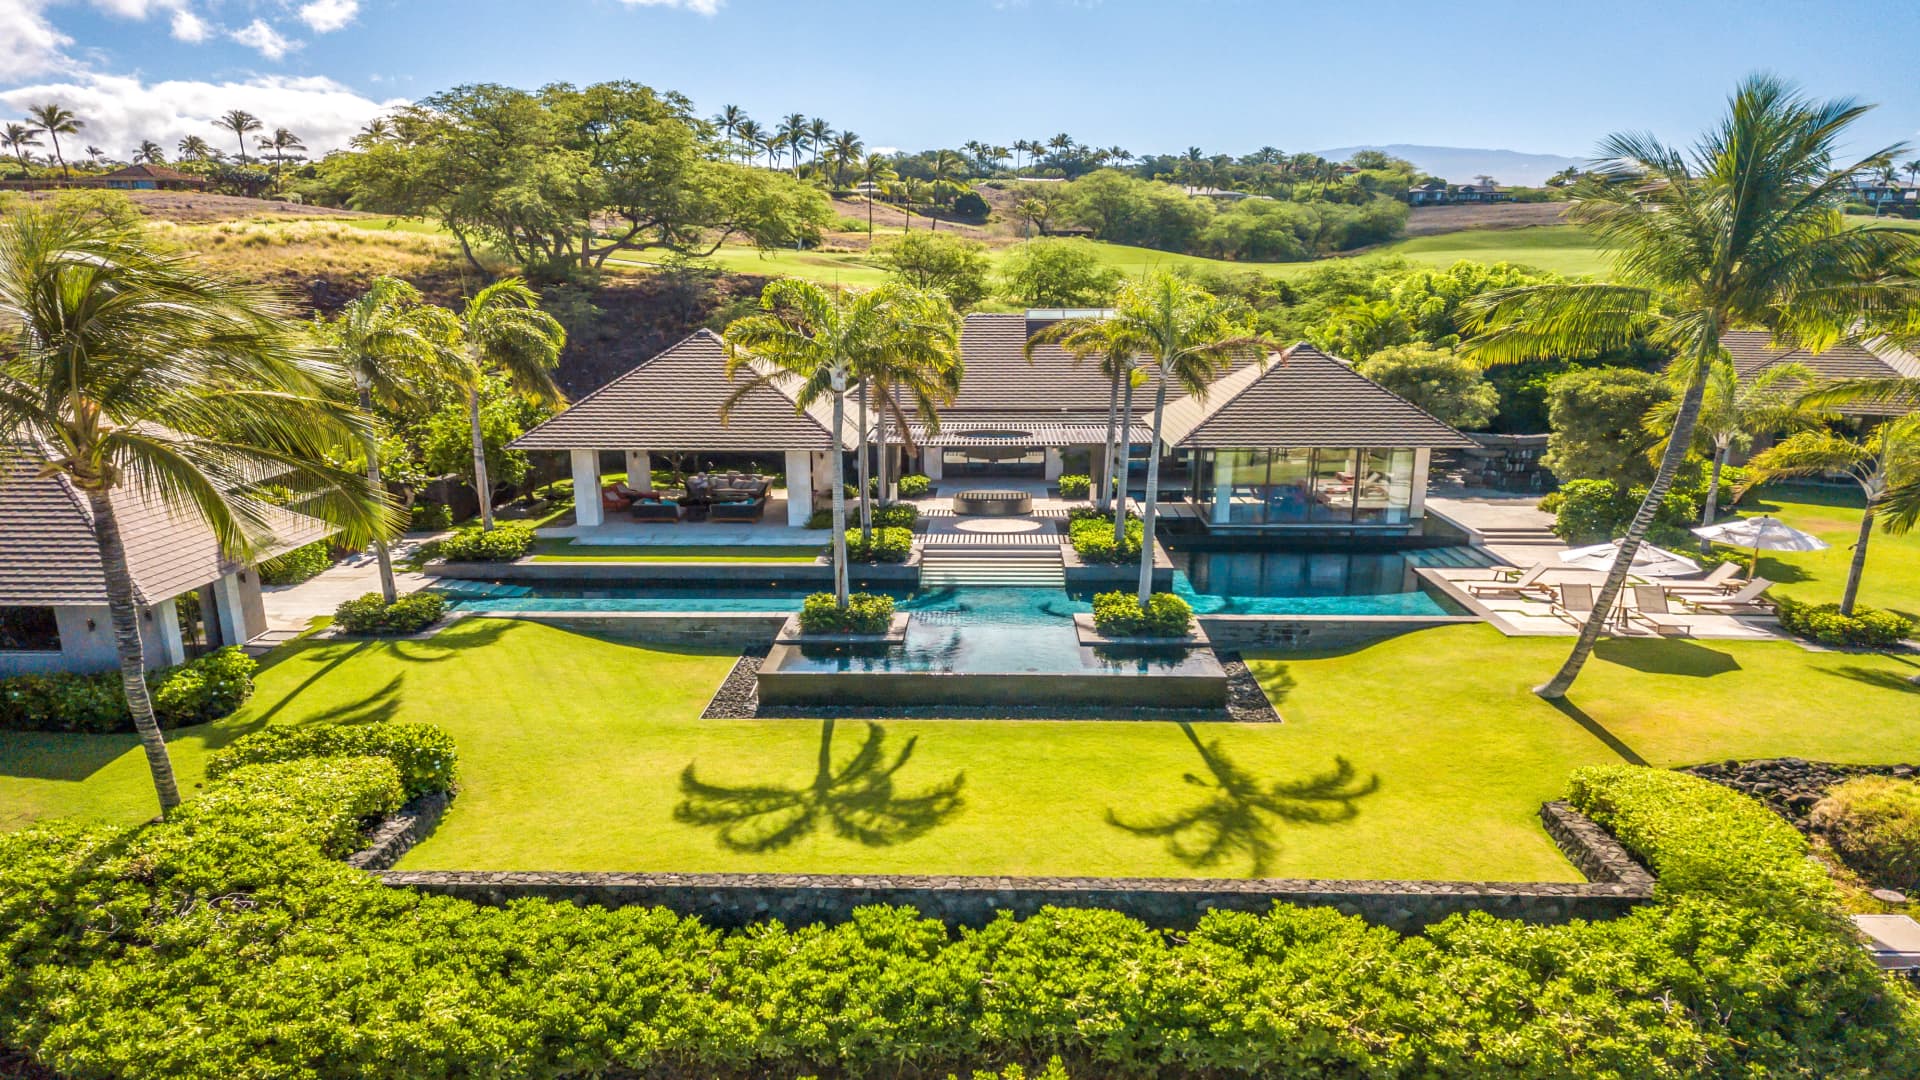 This $18.5 million compound recently sold on the Big Island. It's comprised of seven tropical pavilions that house areas for dining, gathering, sleeping, guests and more.